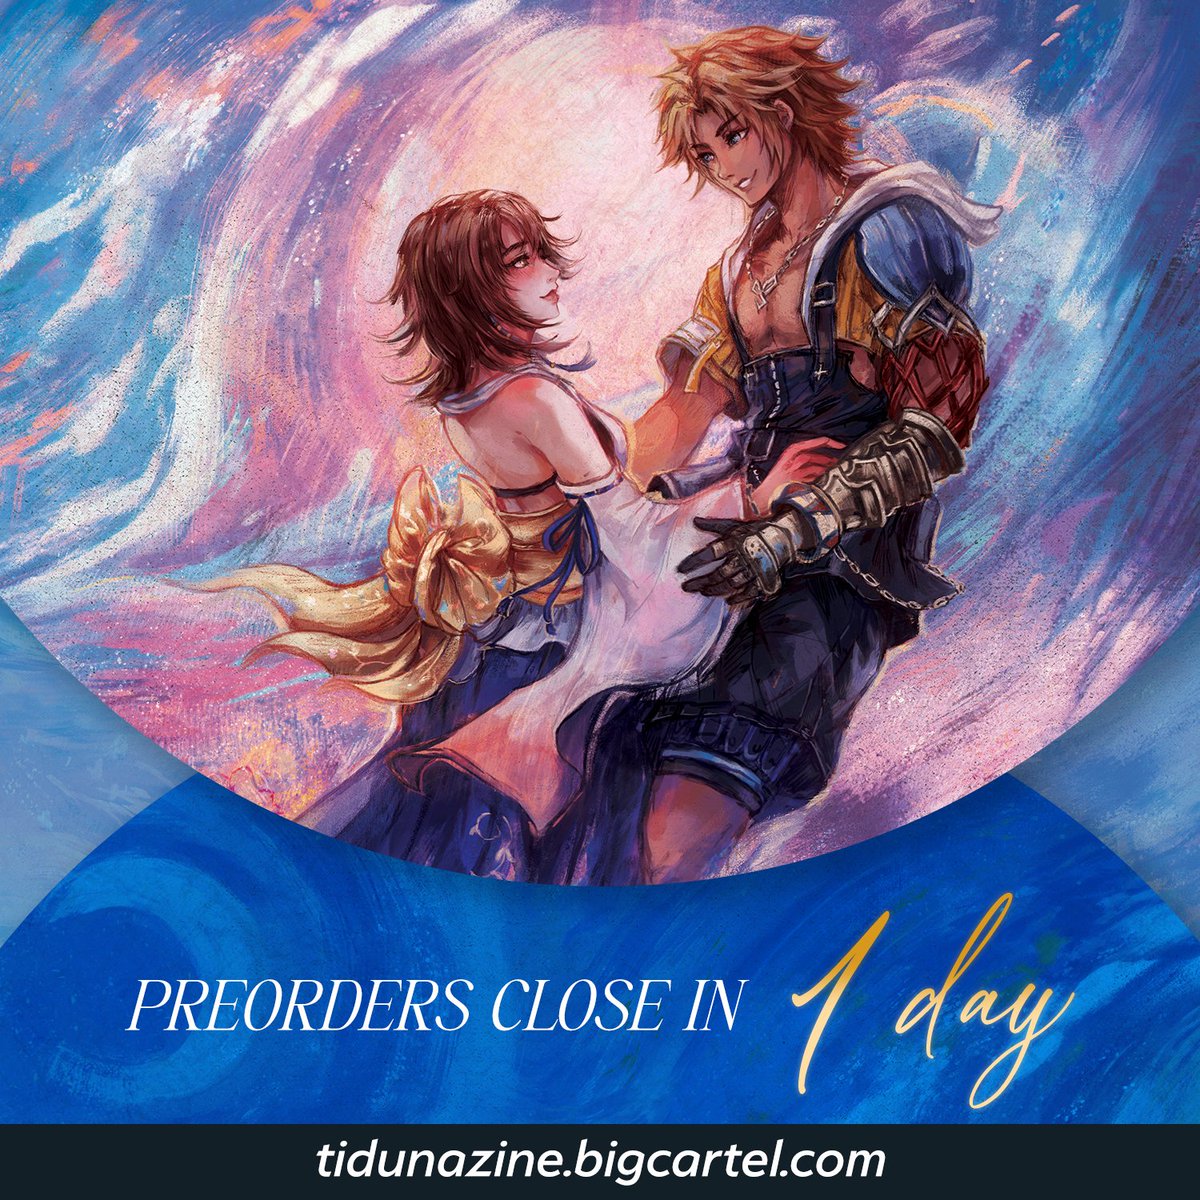 ☀️ PREORDERS CLOSE IN 1 DAY 🌙 

ONE day left for you to grab yourself the Tiduna Zine! Leftover stock will be limited when we open our aftersales, so we recommend for you to secure your bundle now! 💜 

🛒 tidunazine.bigcartel.com